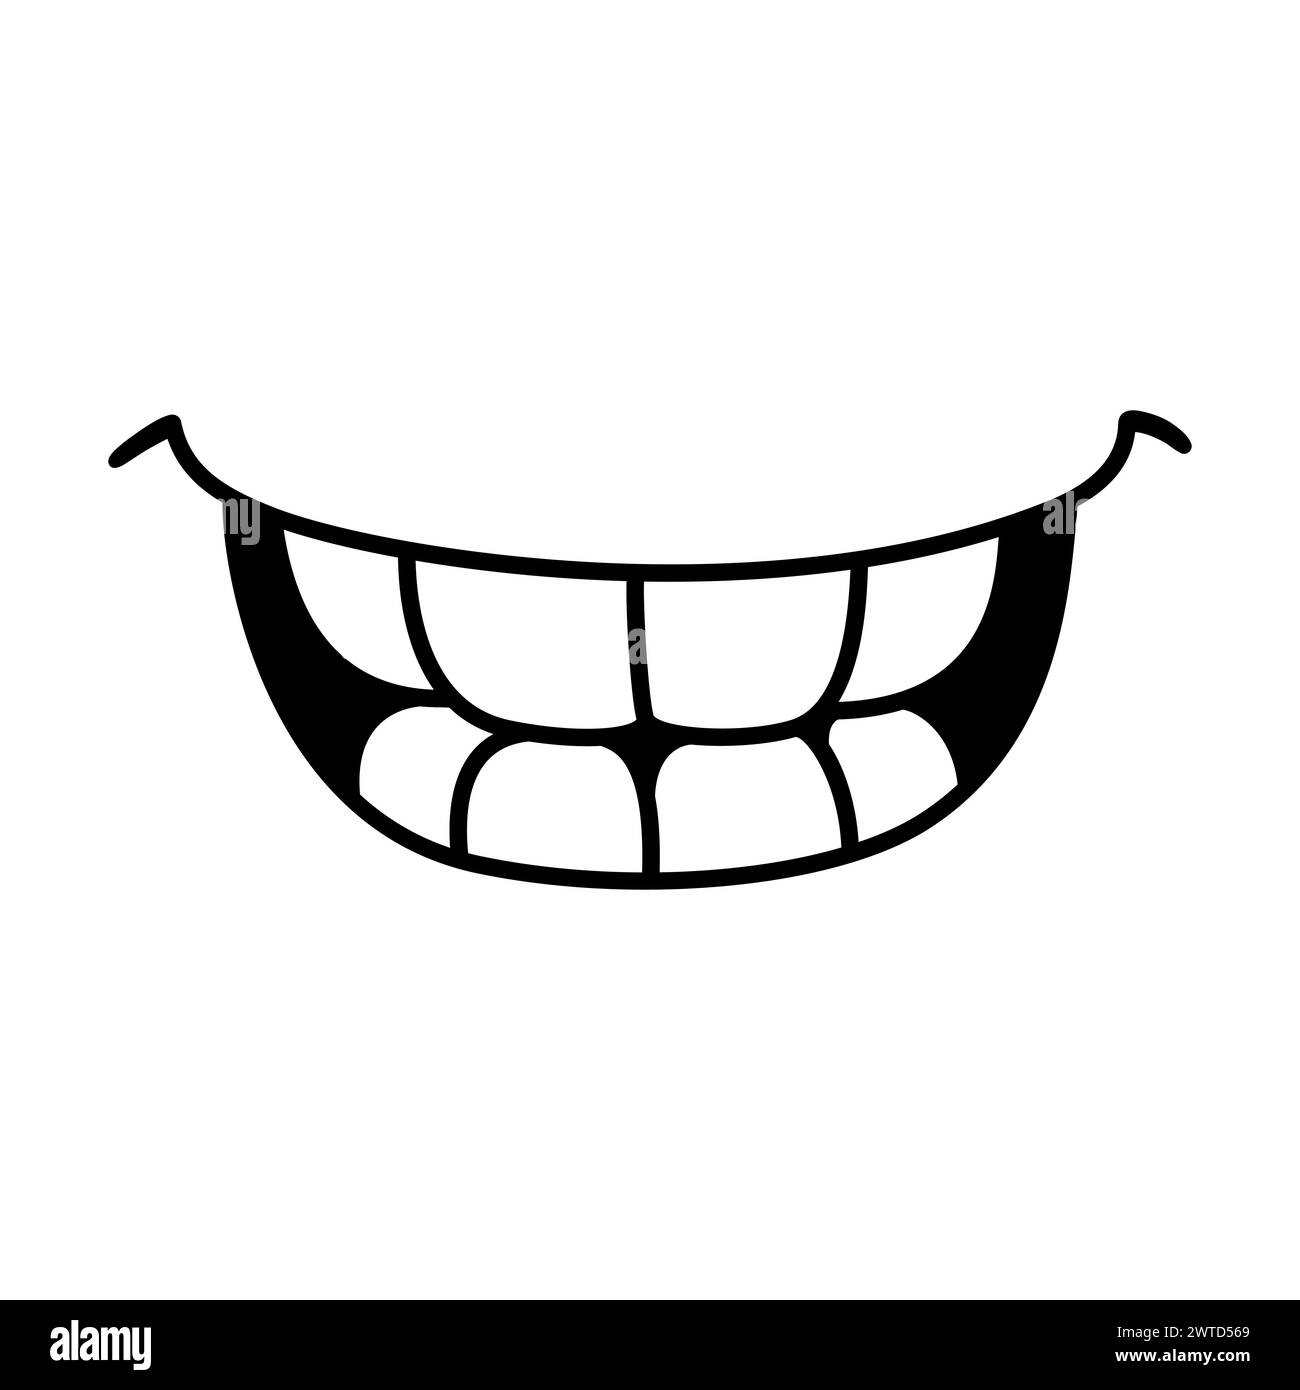 Smiling mouth showing teeth, simple doodle drawing. Simple black and white cartoon icon. Hand drawn vector illustration. Stock Vector